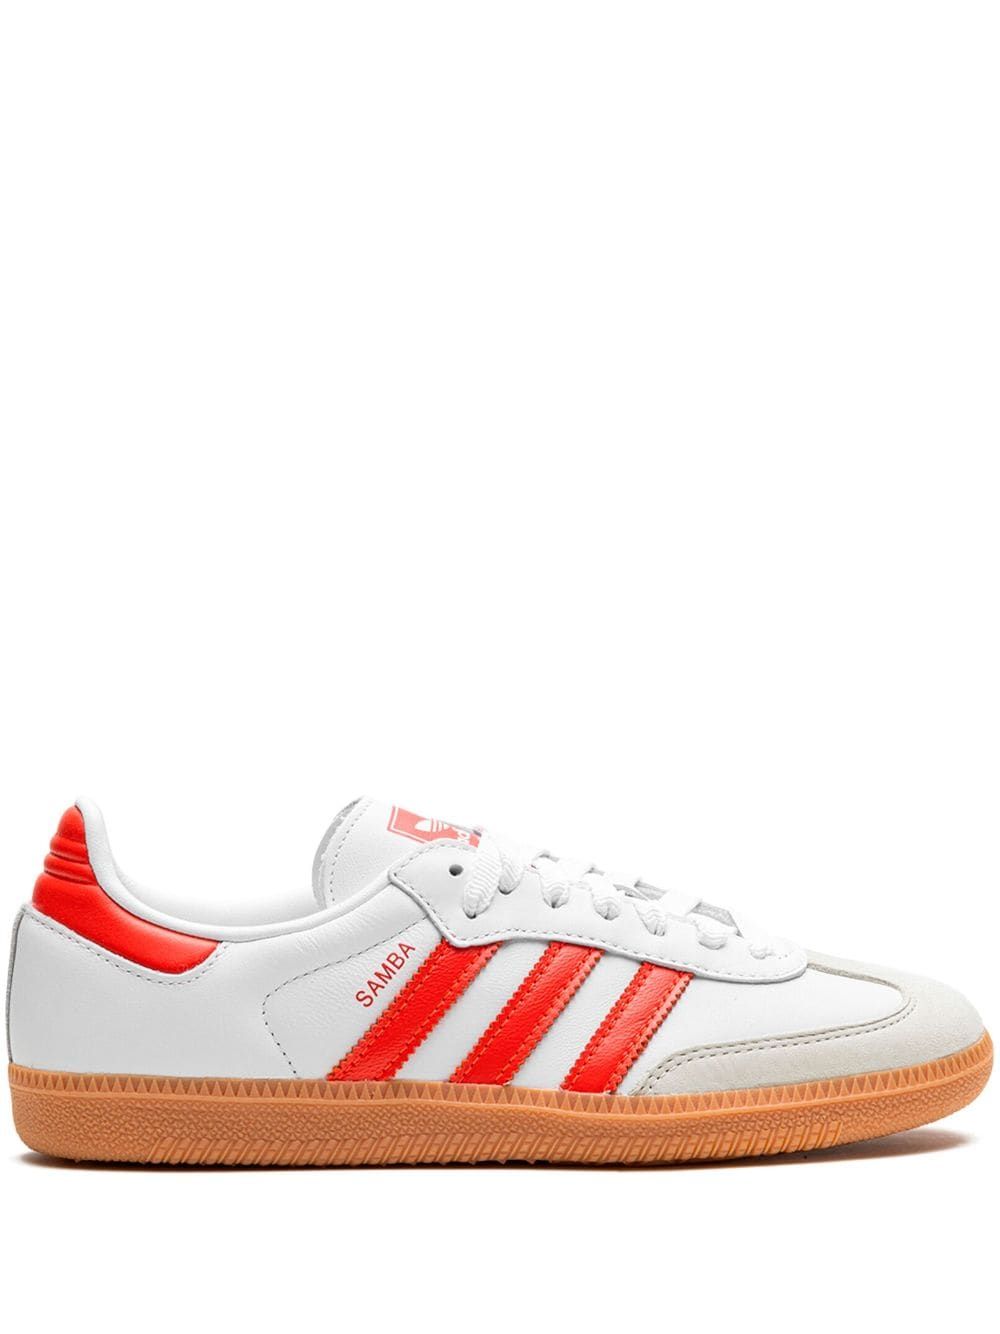 The DetailsadidasSamba "White/Solar Red" sneakersImportedHighlightswhite/red leather contrasting ... | Farfetch Global